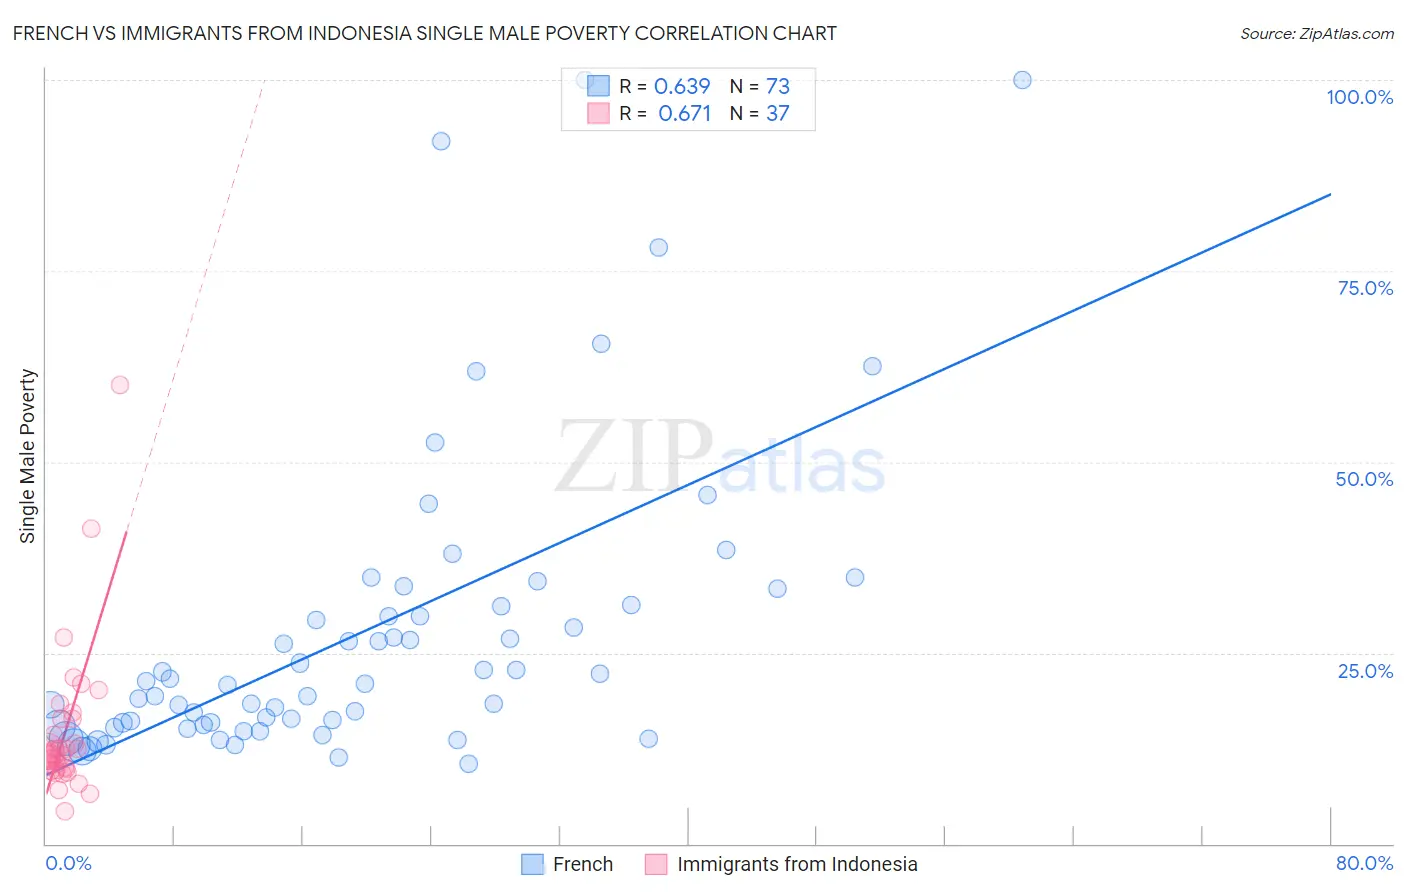 French vs Immigrants from Indonesia Single Male Poverty